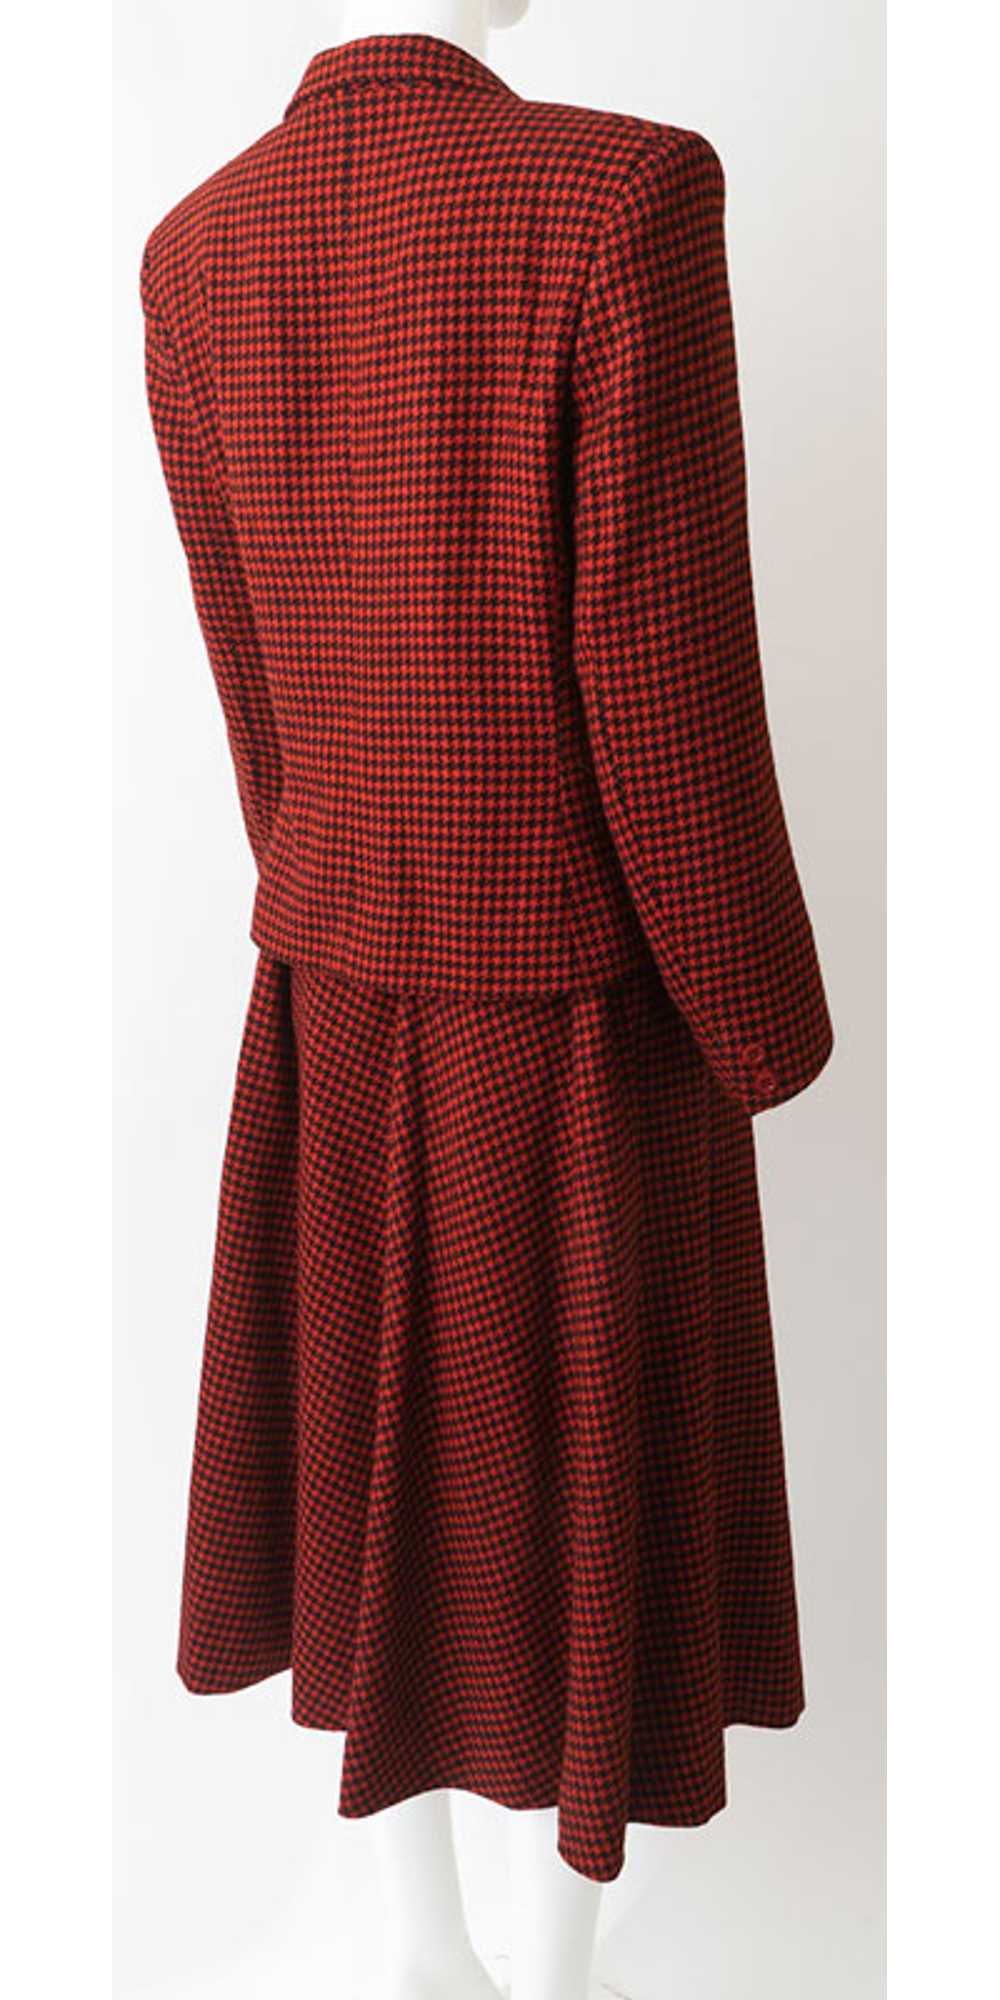 Fab 80s Jaeger Houndstooth Outfit - image 4